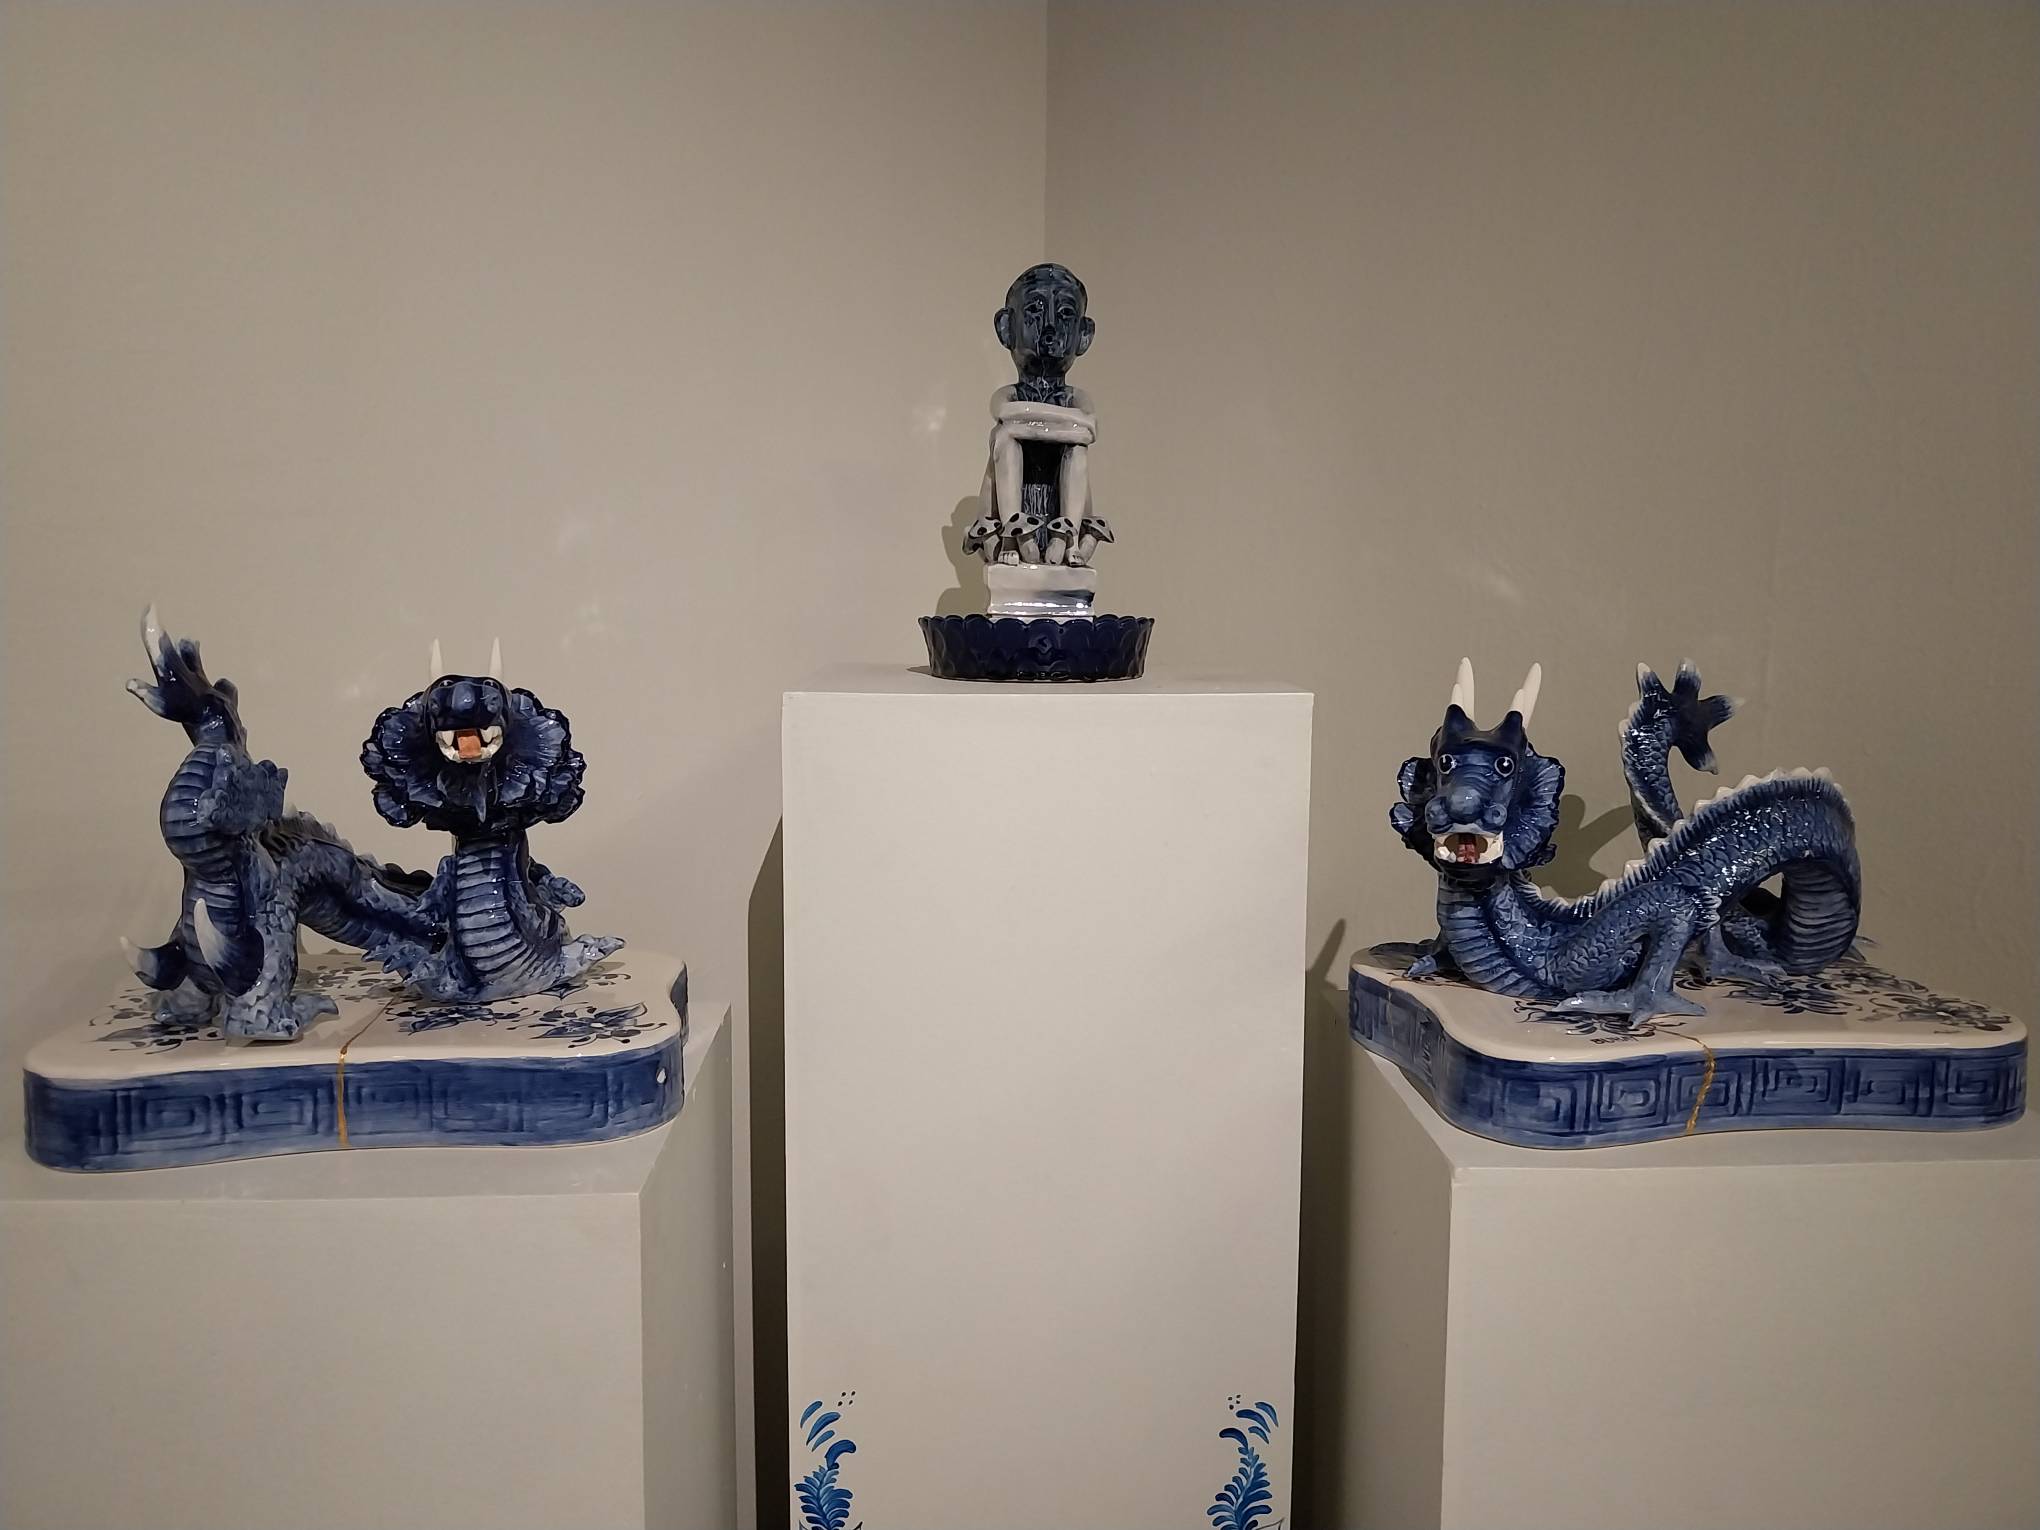 Three porcelain sculptures as presented in the exhibit. Photo by Elle Yap.